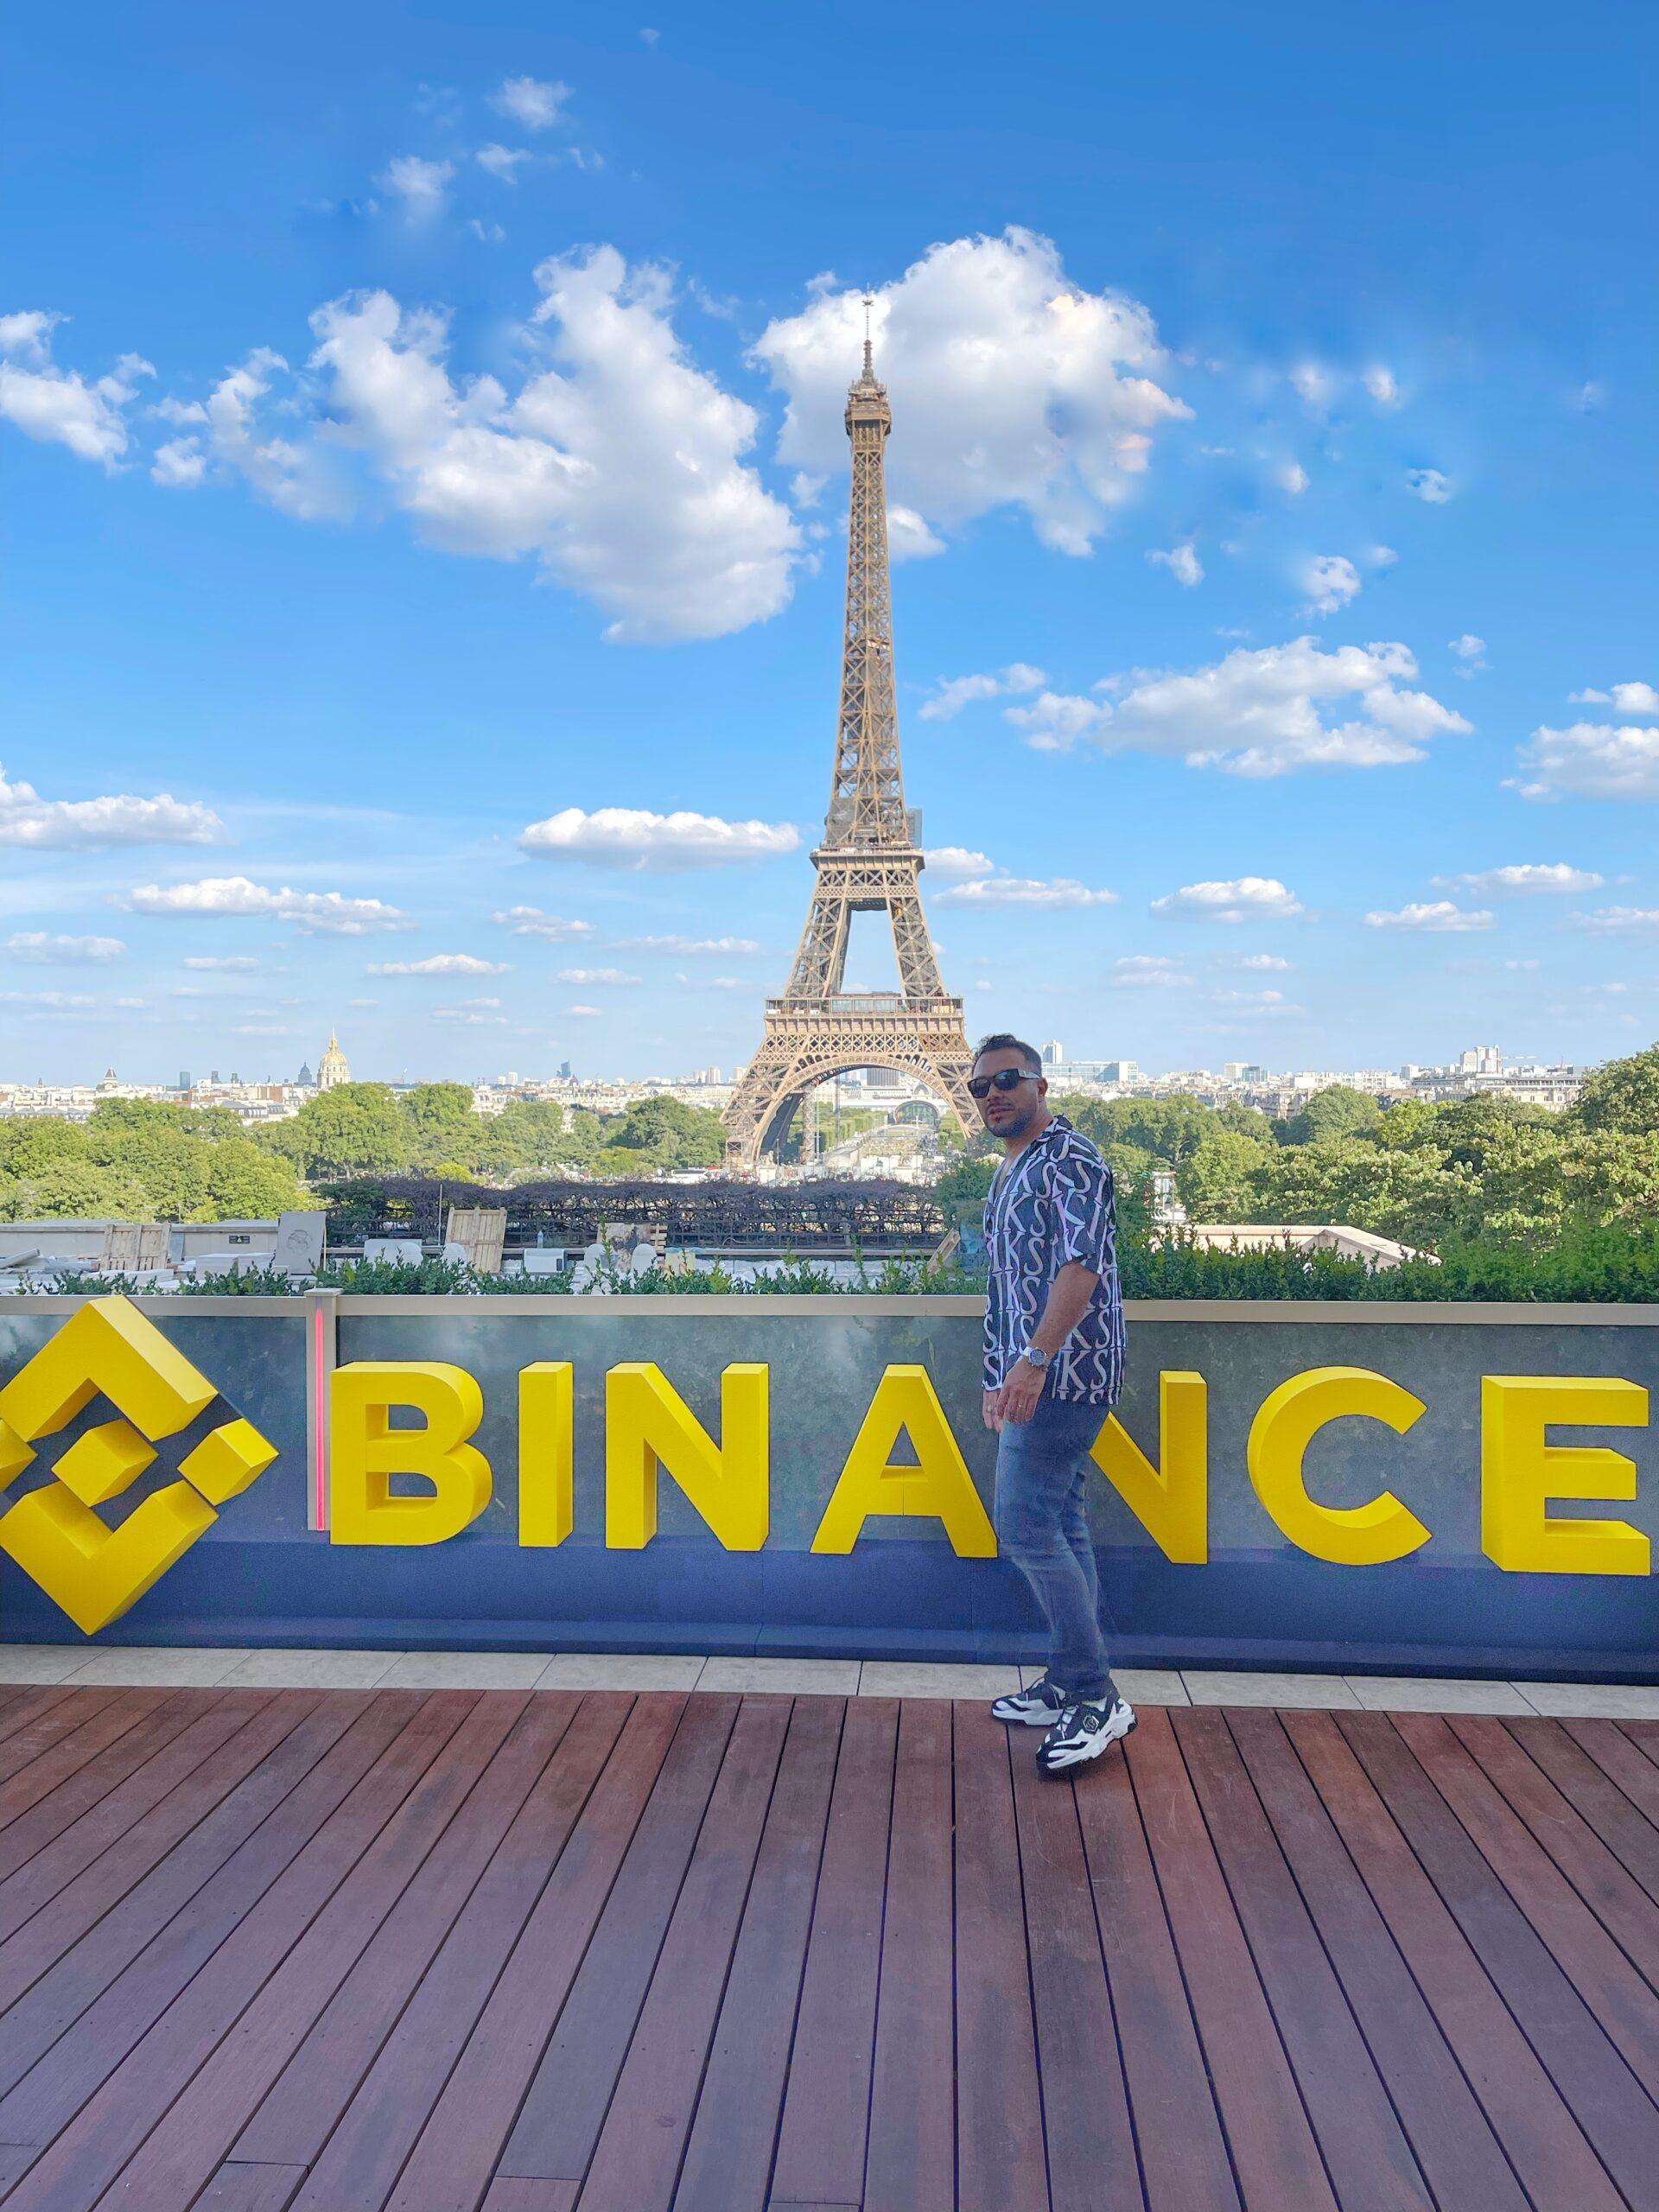 Top Crypto Influencer Andres Meneses Celebrates Binance's 5th Anniversary, Paris Hilton Approves!